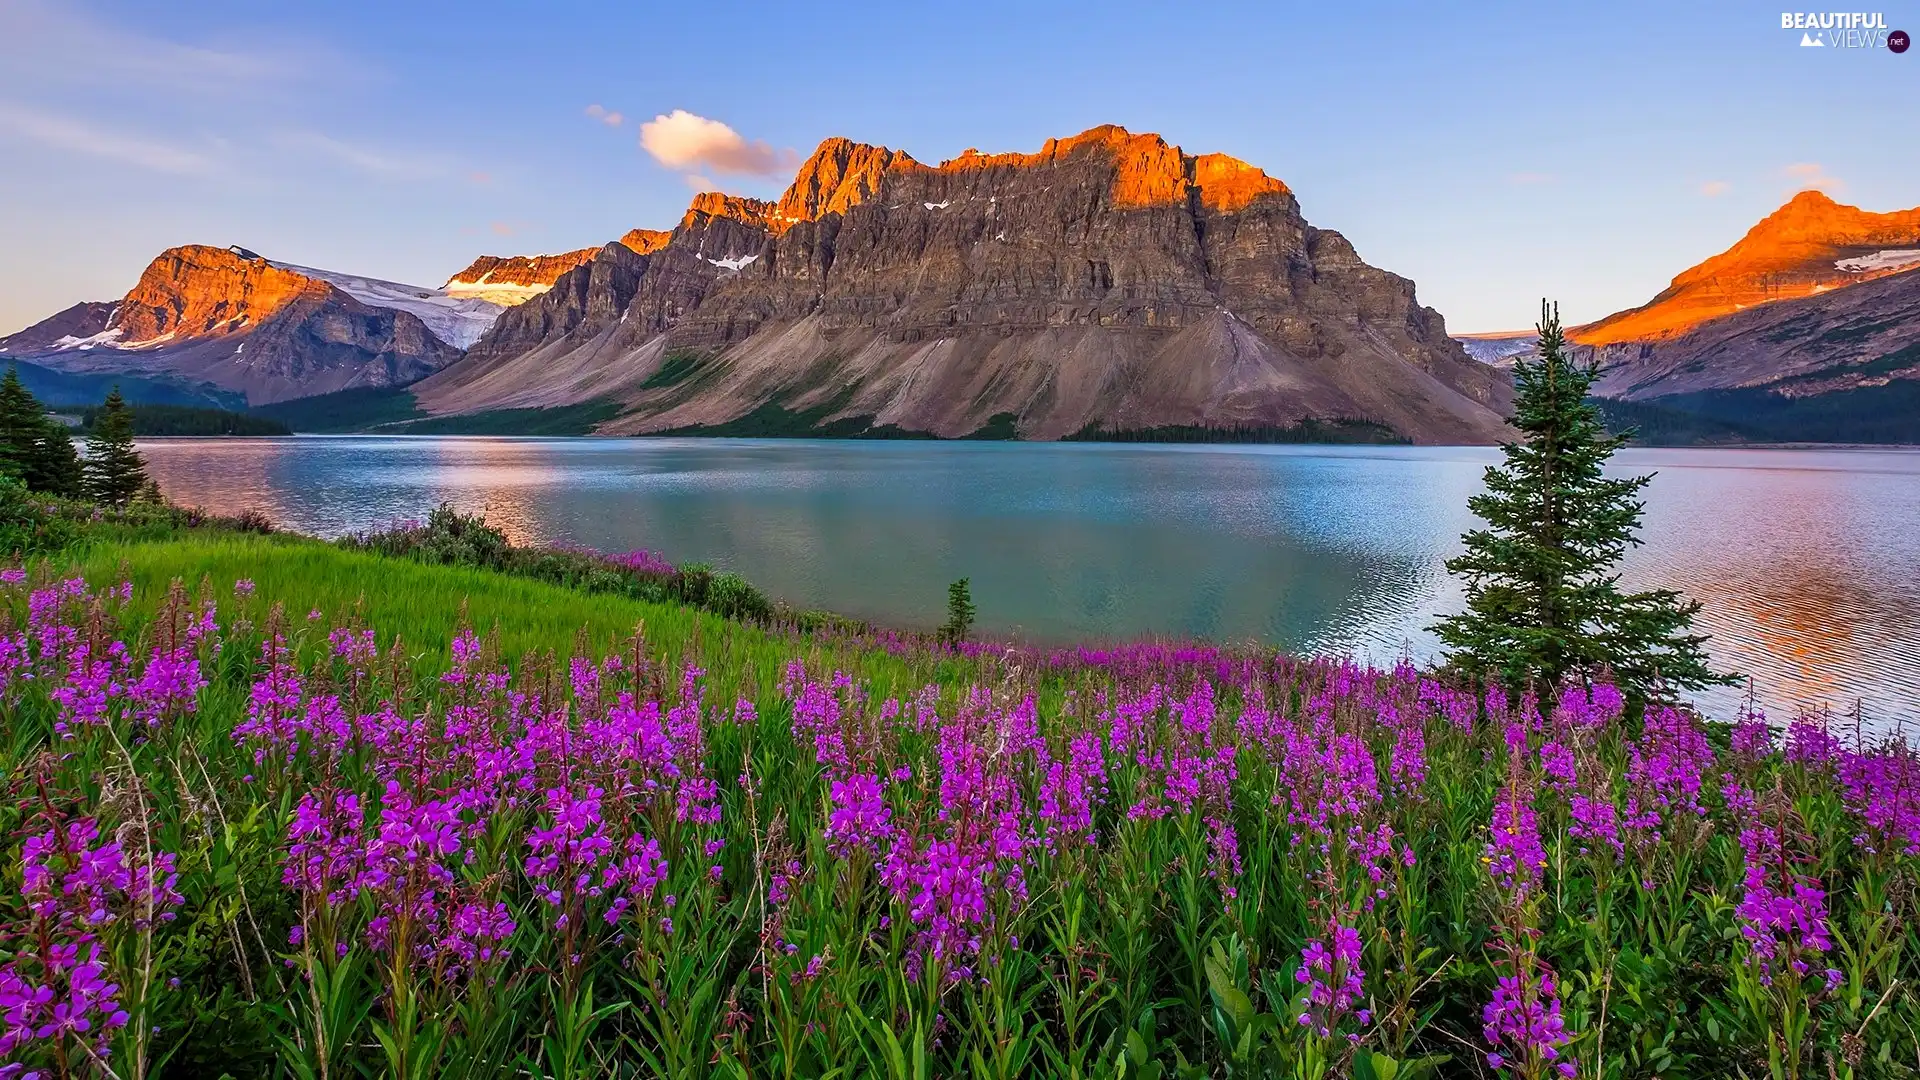 Province of Alberta, Canada, Banff National Park, Crowfoot Mountain, viewes, Sunrise, Flowers, trees, Bow Lake